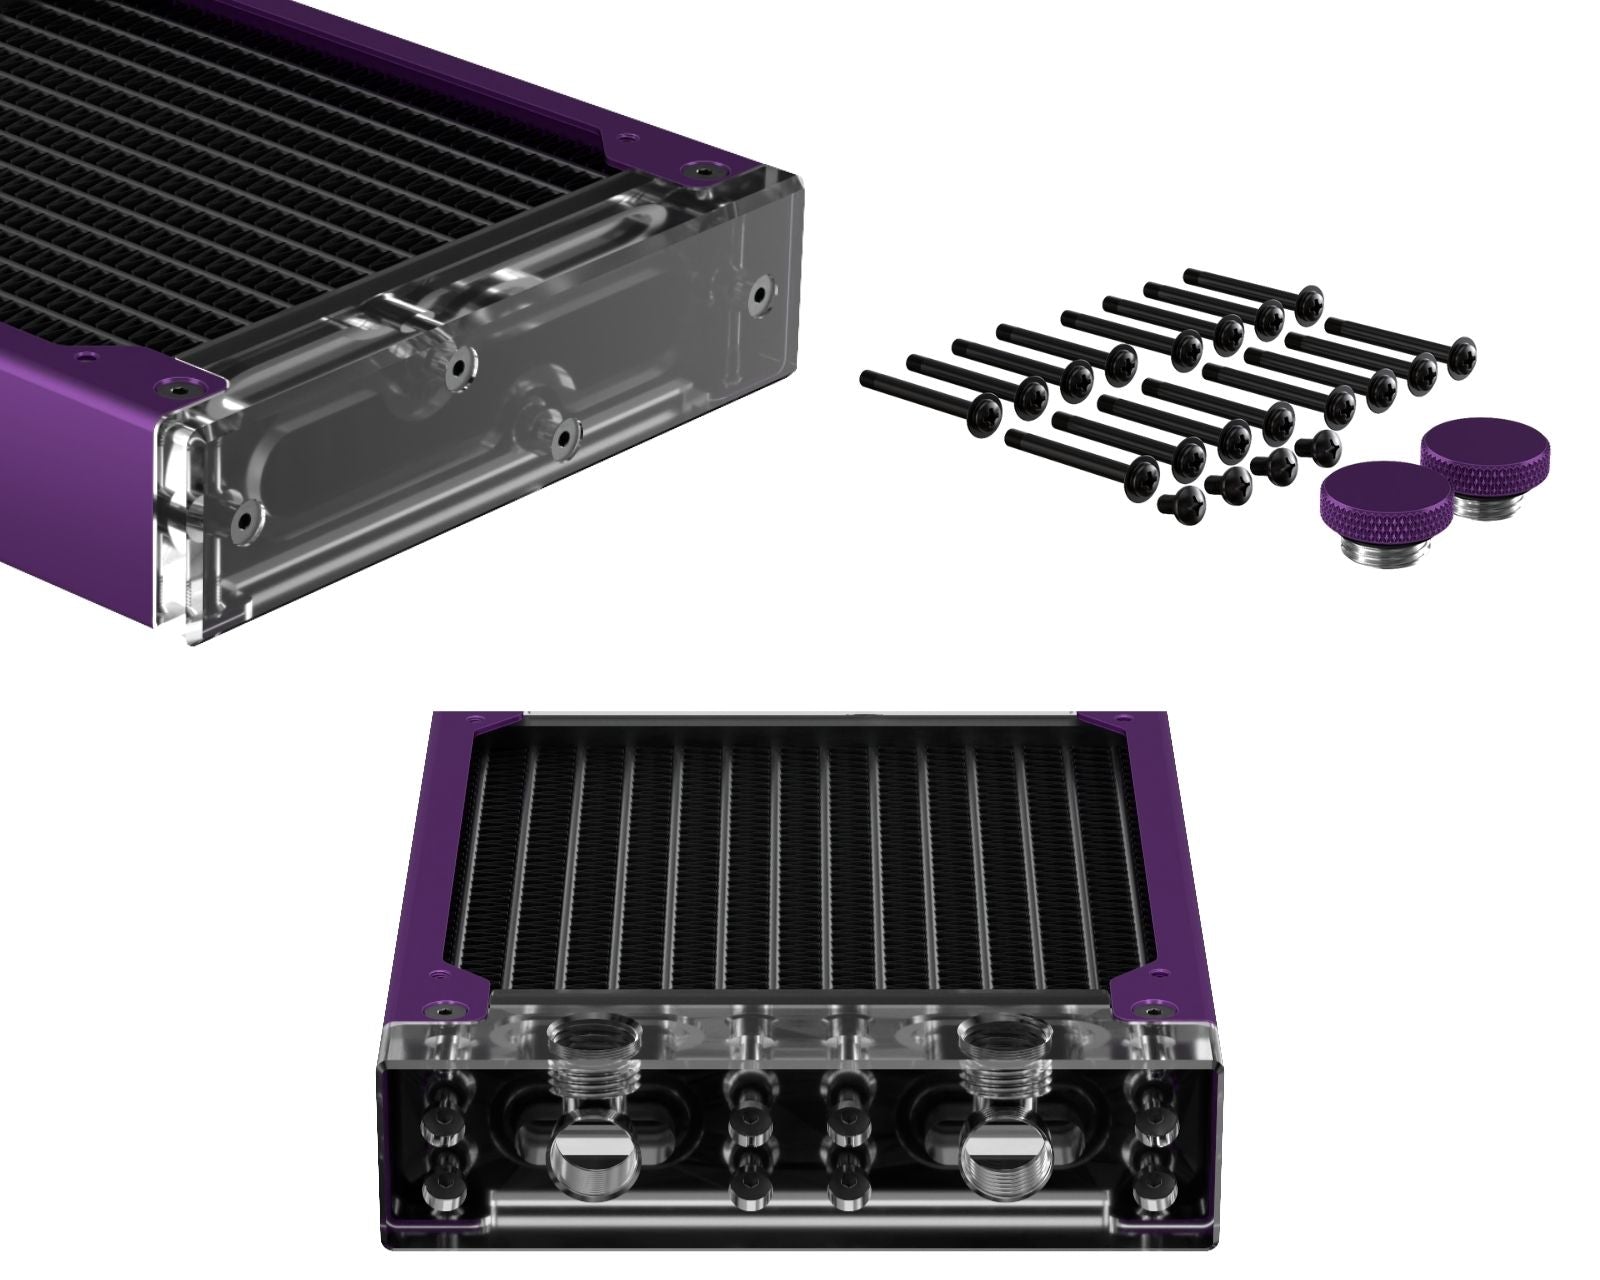 PrimoChill 480SL (30mm) EXIMO Modular Radiator, Clear Acrylic, 4x120mm, Quad Fan (R-SL-A48) Available in 20+ Colors, Assembled in USA and Custom Watercooling Loop Ready - Candy Purple